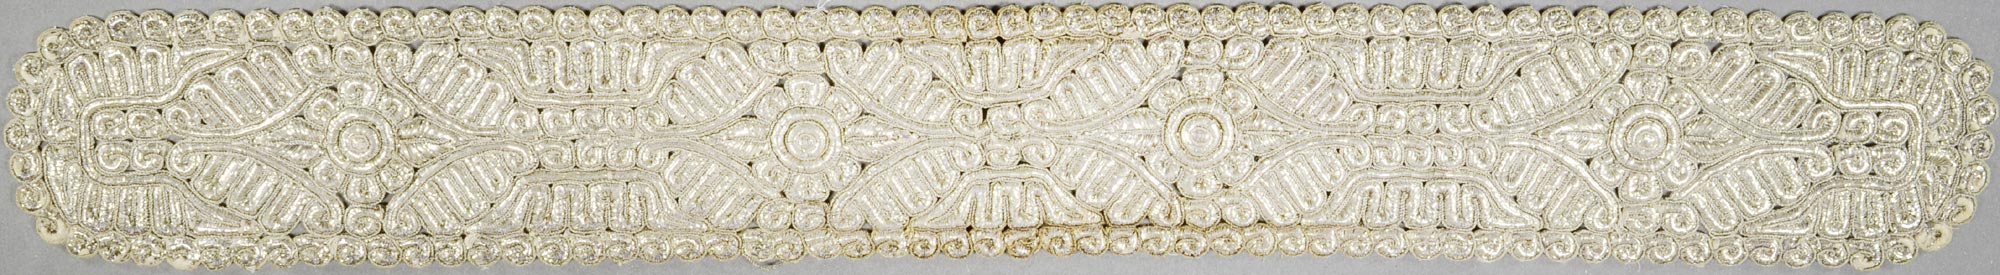 ATARAH  20th century. Prayer shawl made of embroidered chains decorated with silver. L. 93 cm.